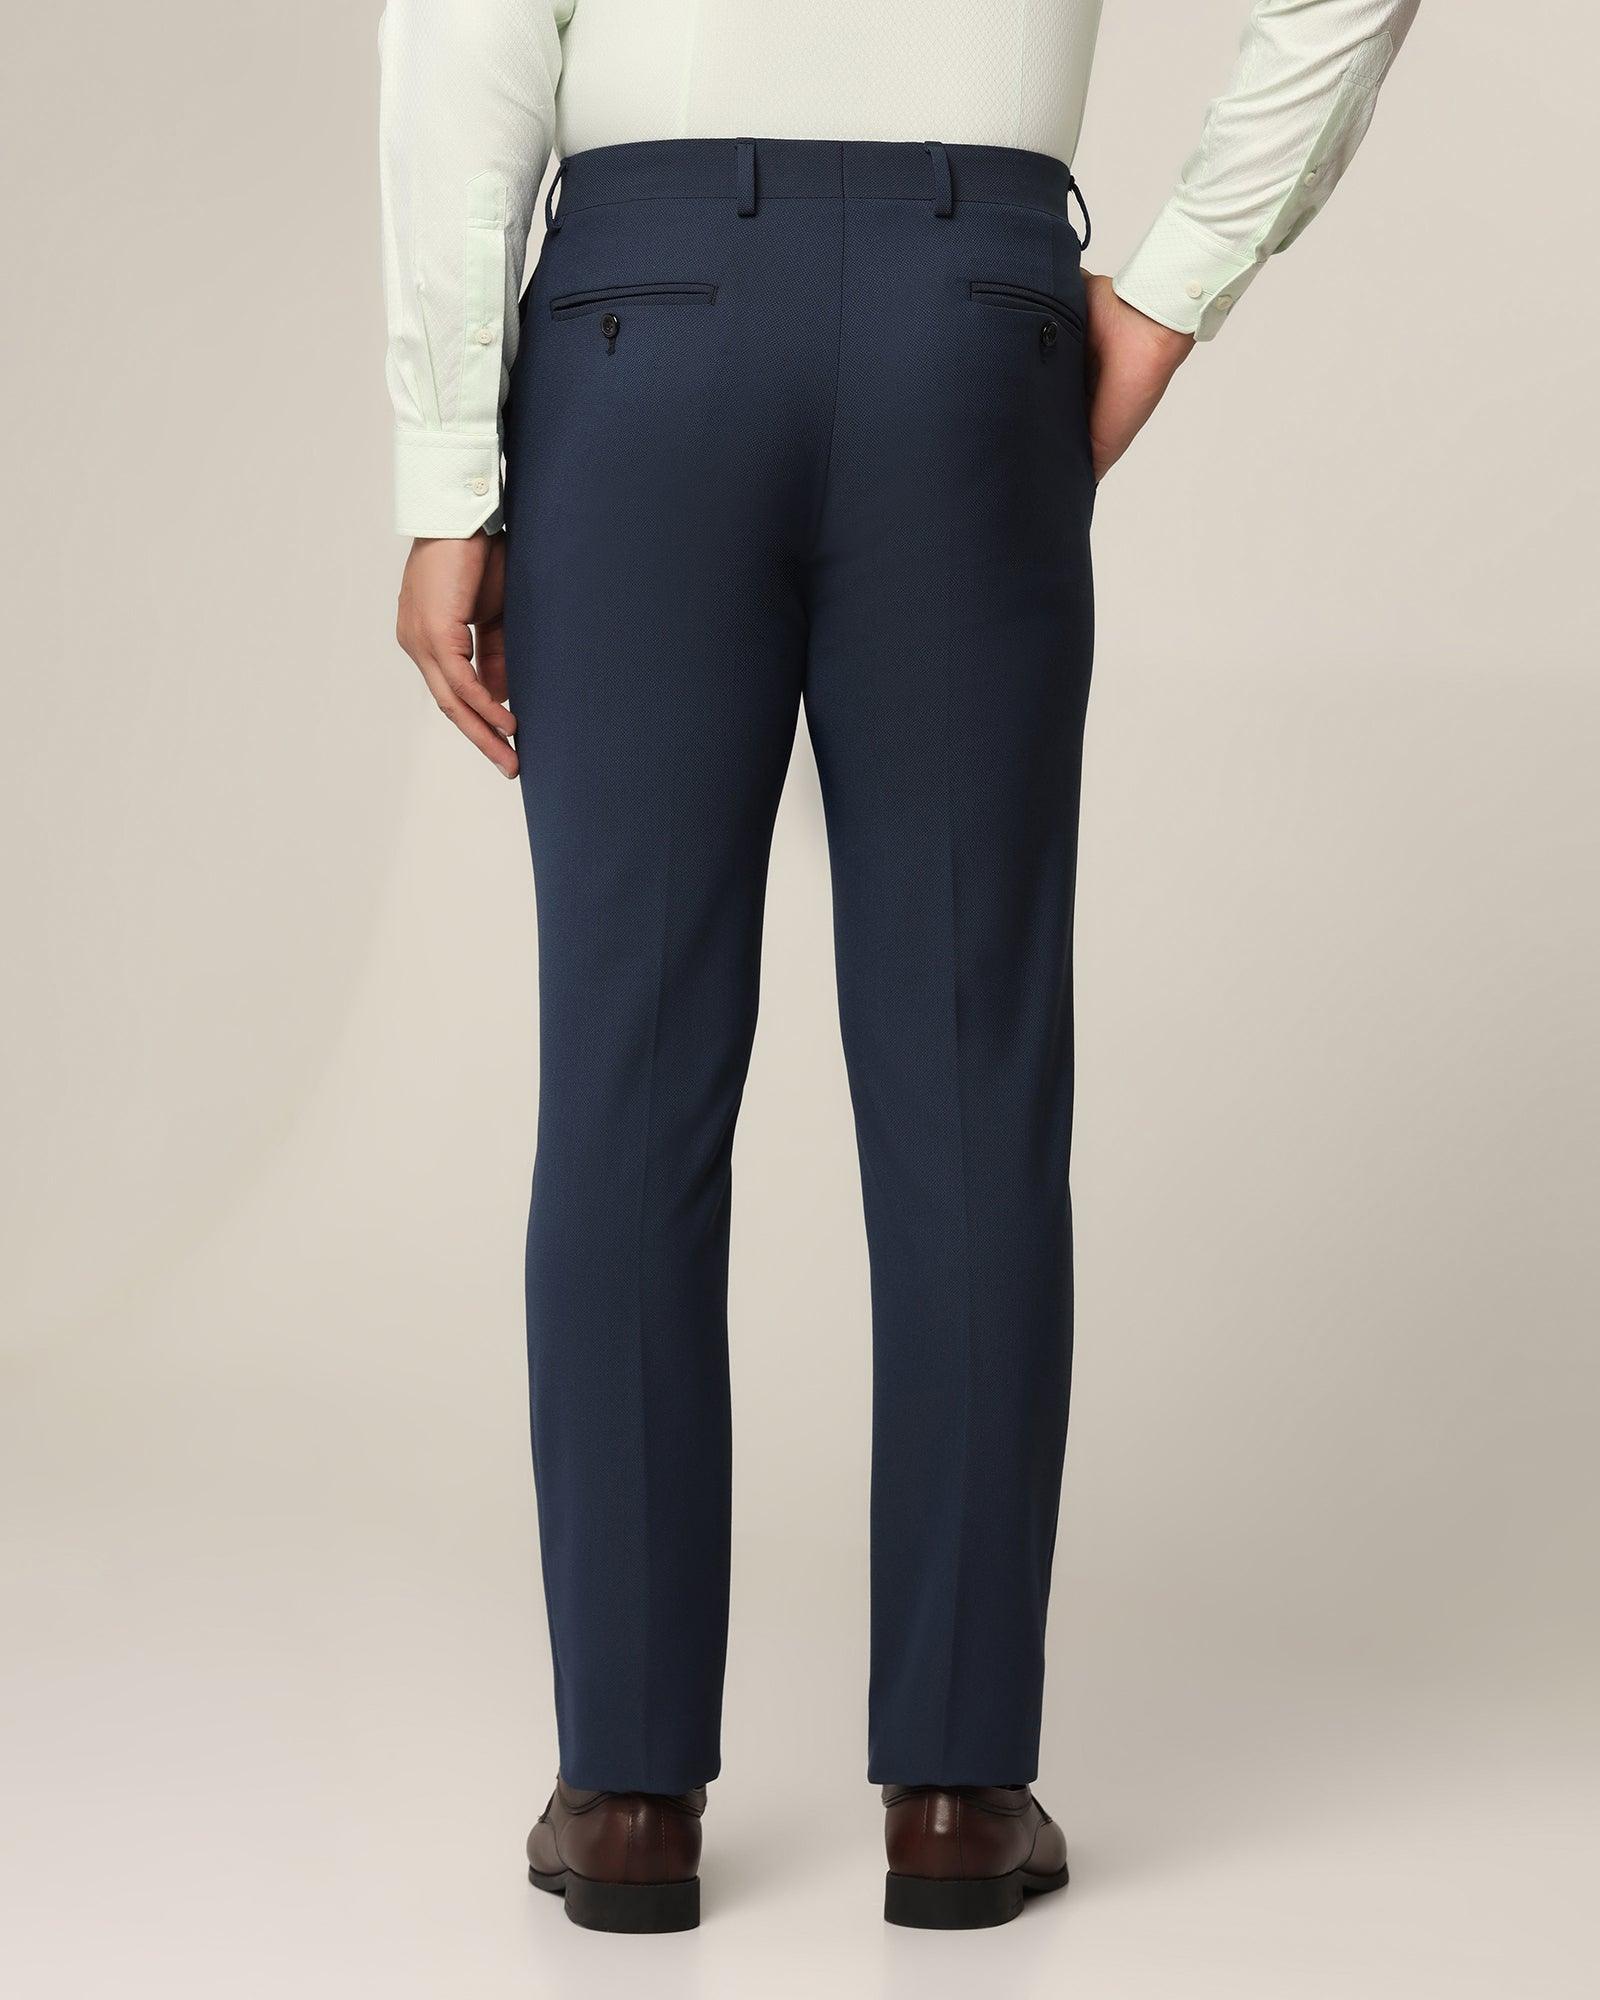 Buy Next Tailored Fit Wool Blend Suit: Trouser - Trousers for Men 8849799 |  Myntra